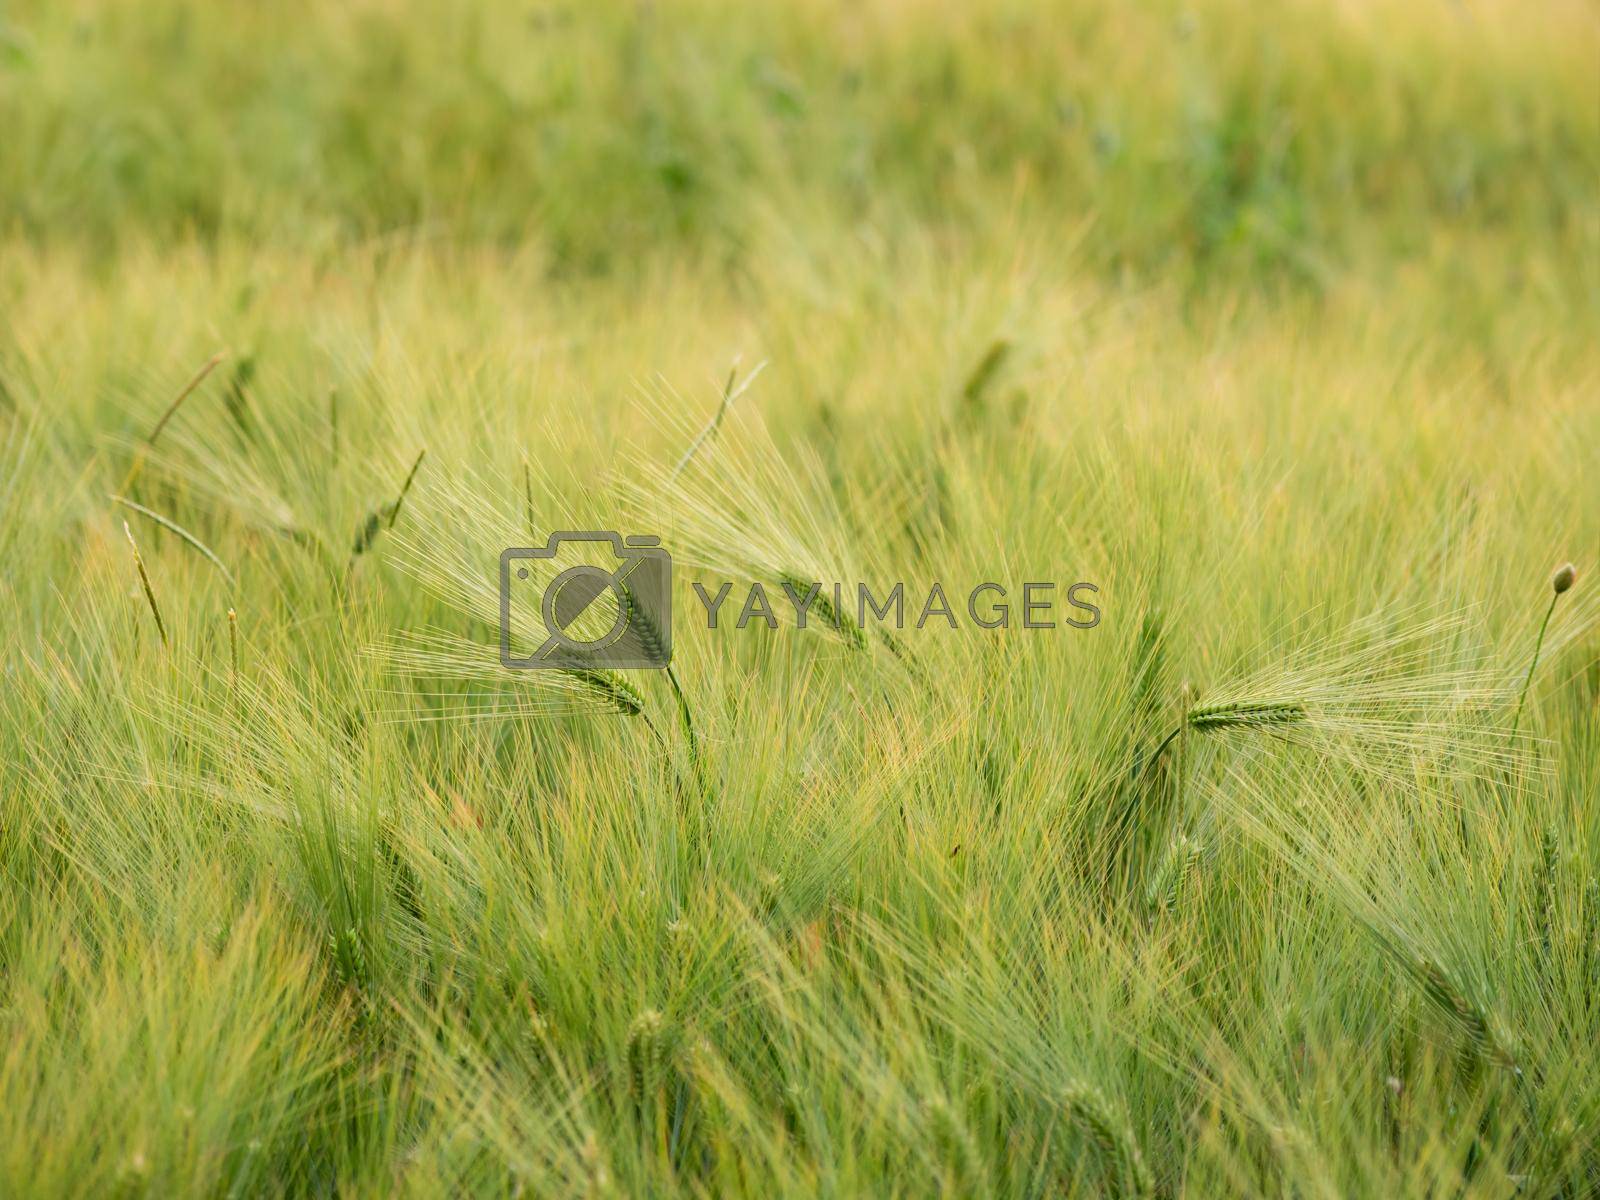 Royalty free image of Agricultural field of rye. Green ears with grains. Growing cereal plants. Natural background. by aksenovko